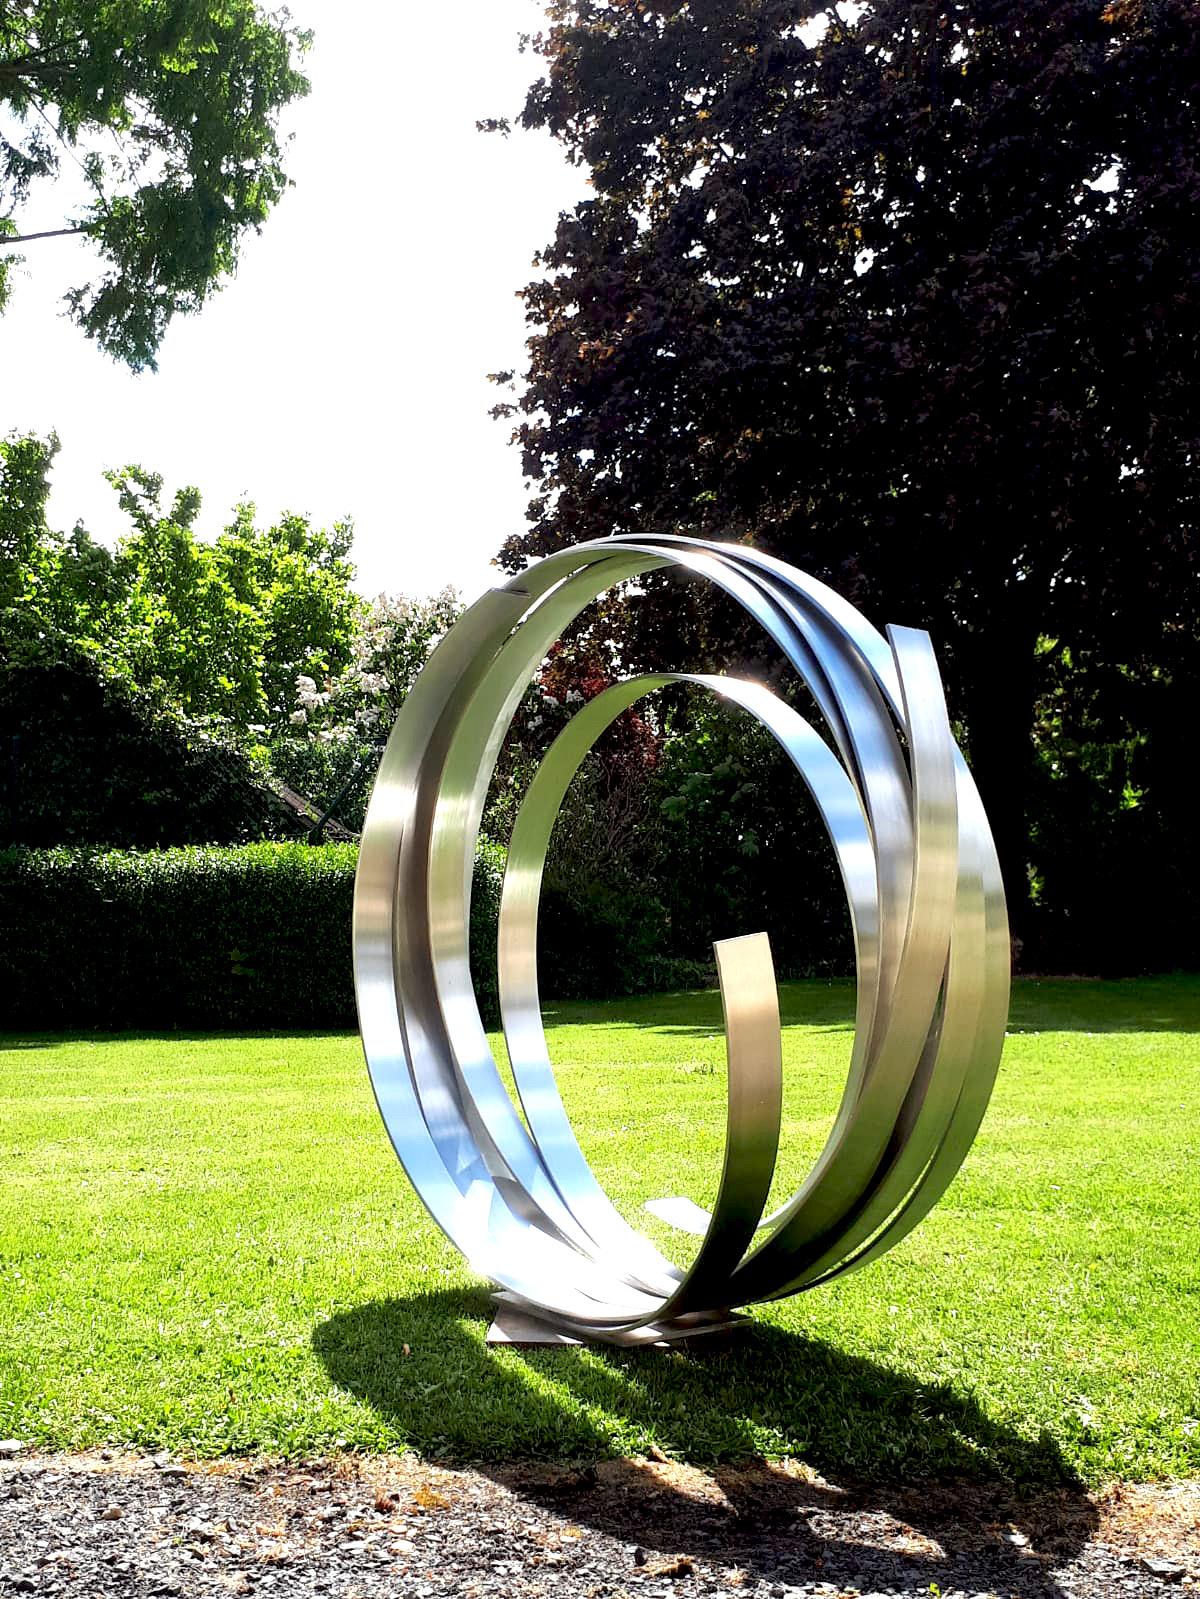 Artist: Kuno Vollet

Title: Silver Orbit

Very large Contemporary stainless steel sculpture for inside or garden outdoor spaces.

Beautiful spiral dancing its way towards the sky.